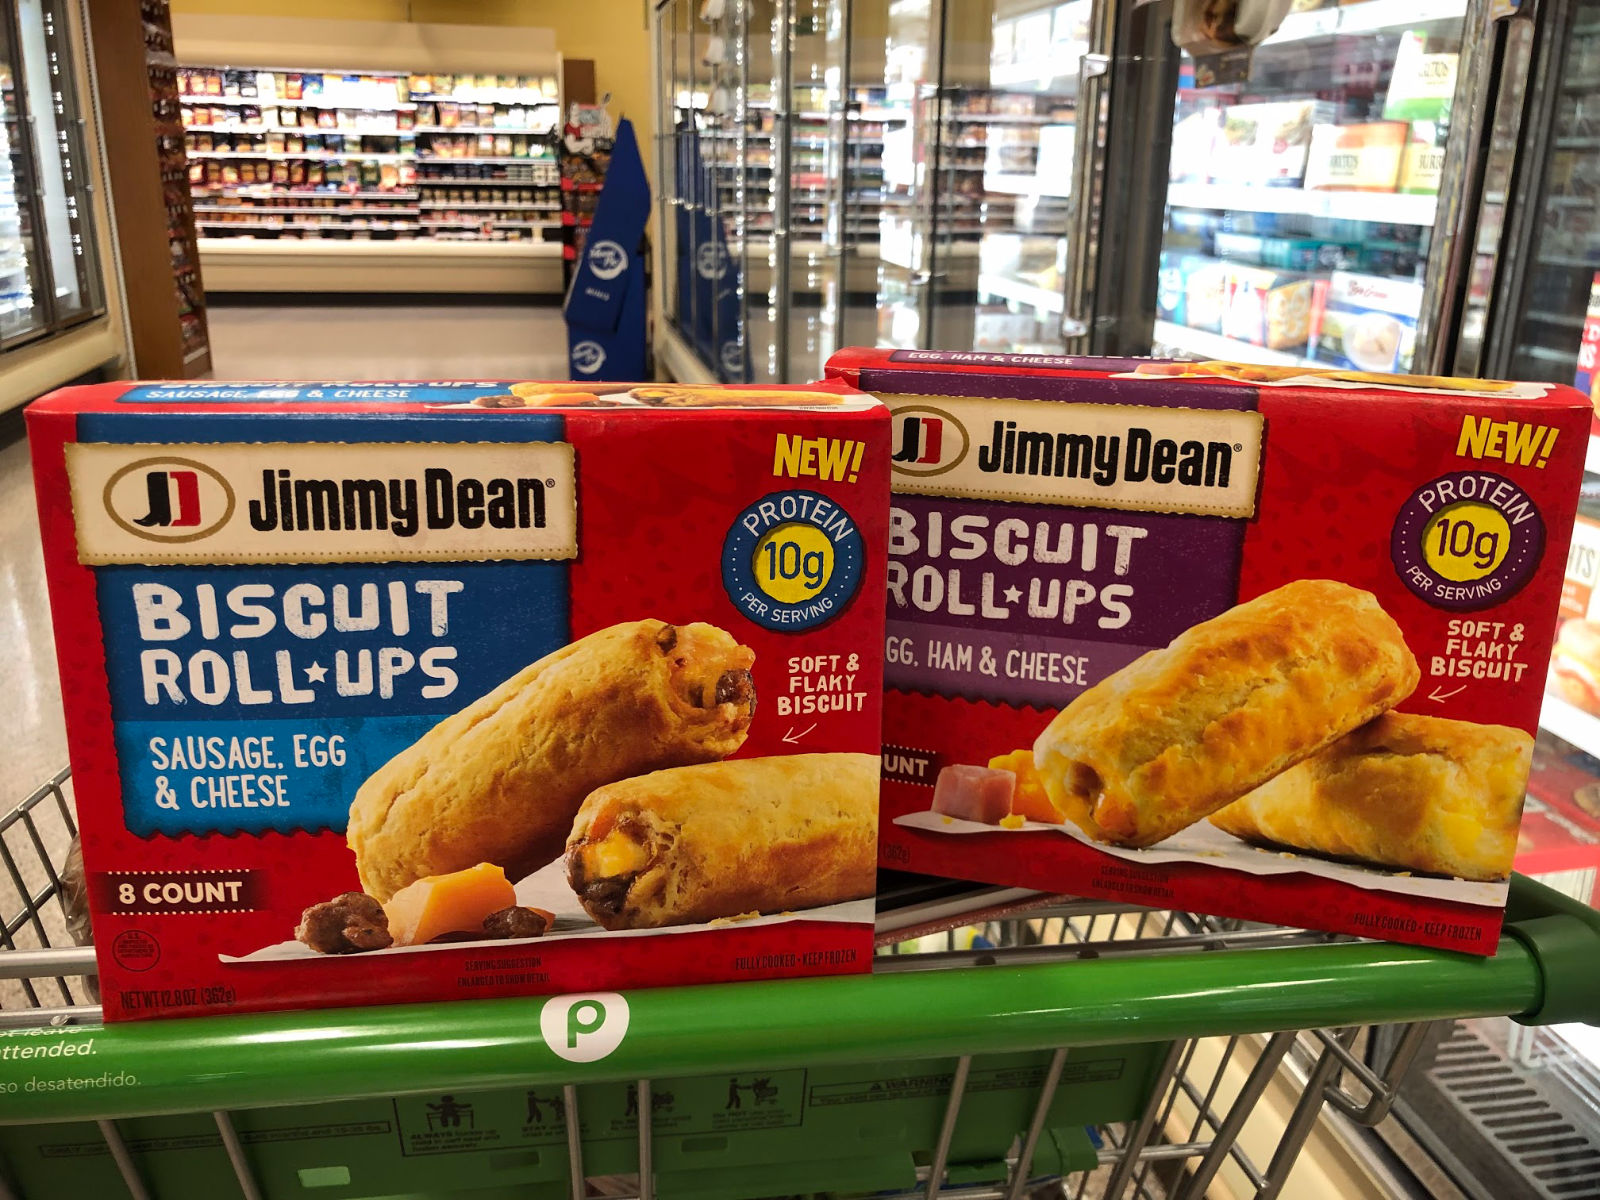 Last Week To Save On NEW Jimmy Dean Biscuit Roll-Ups – Save On A Delicious & Convenient Breakfast Option At Publix